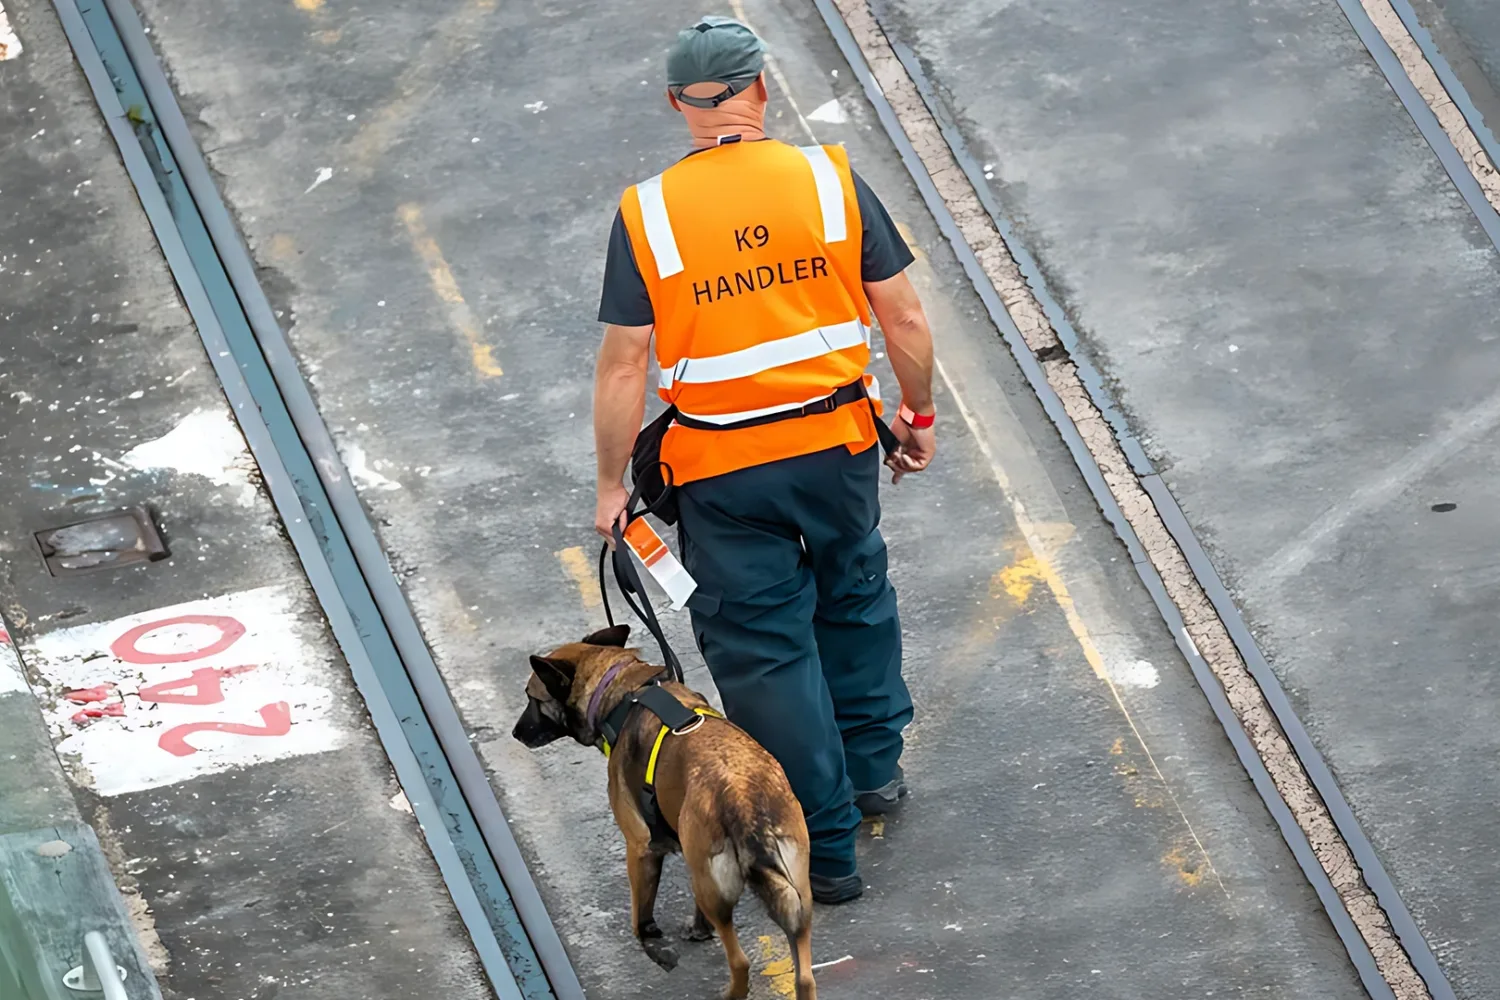 K9 security guard, in Guard Mark uniform, uses watchdog to prevent criminal activity as instructed.